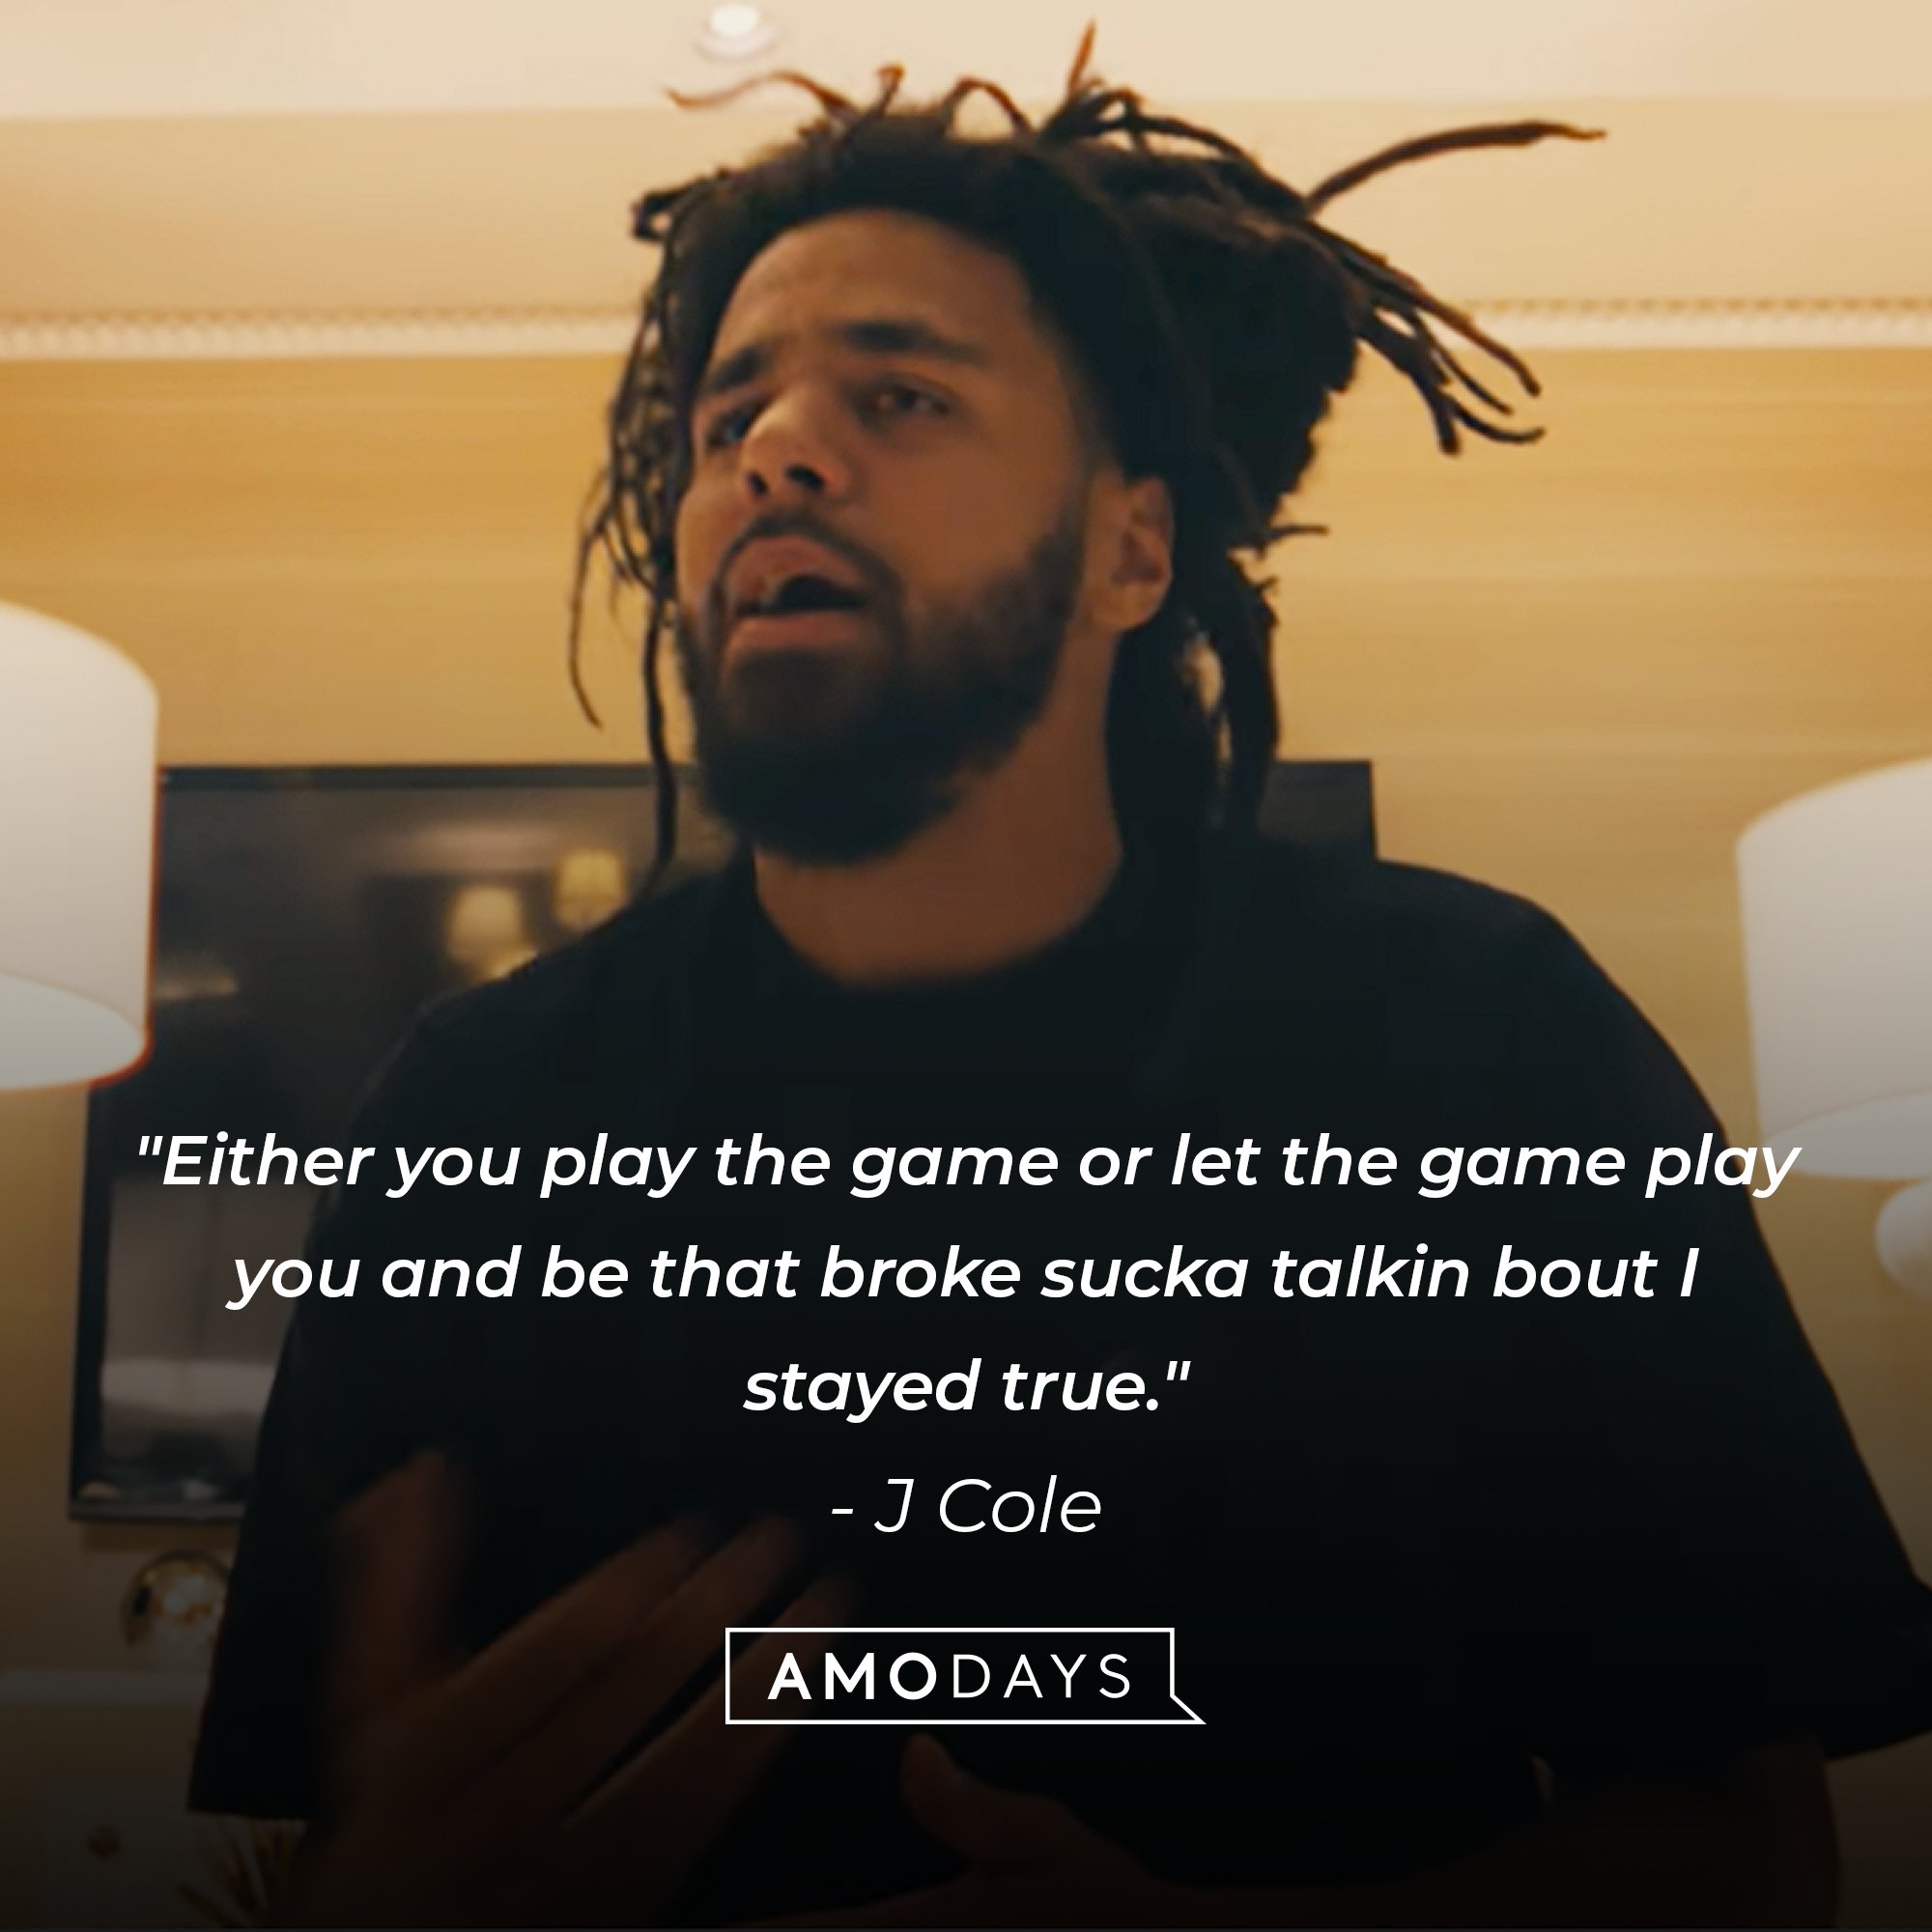 J Cole's quote: "Either you play the game or let the game play you and be that broke sucka talkin bout I stayed true." | Image: AmoDays